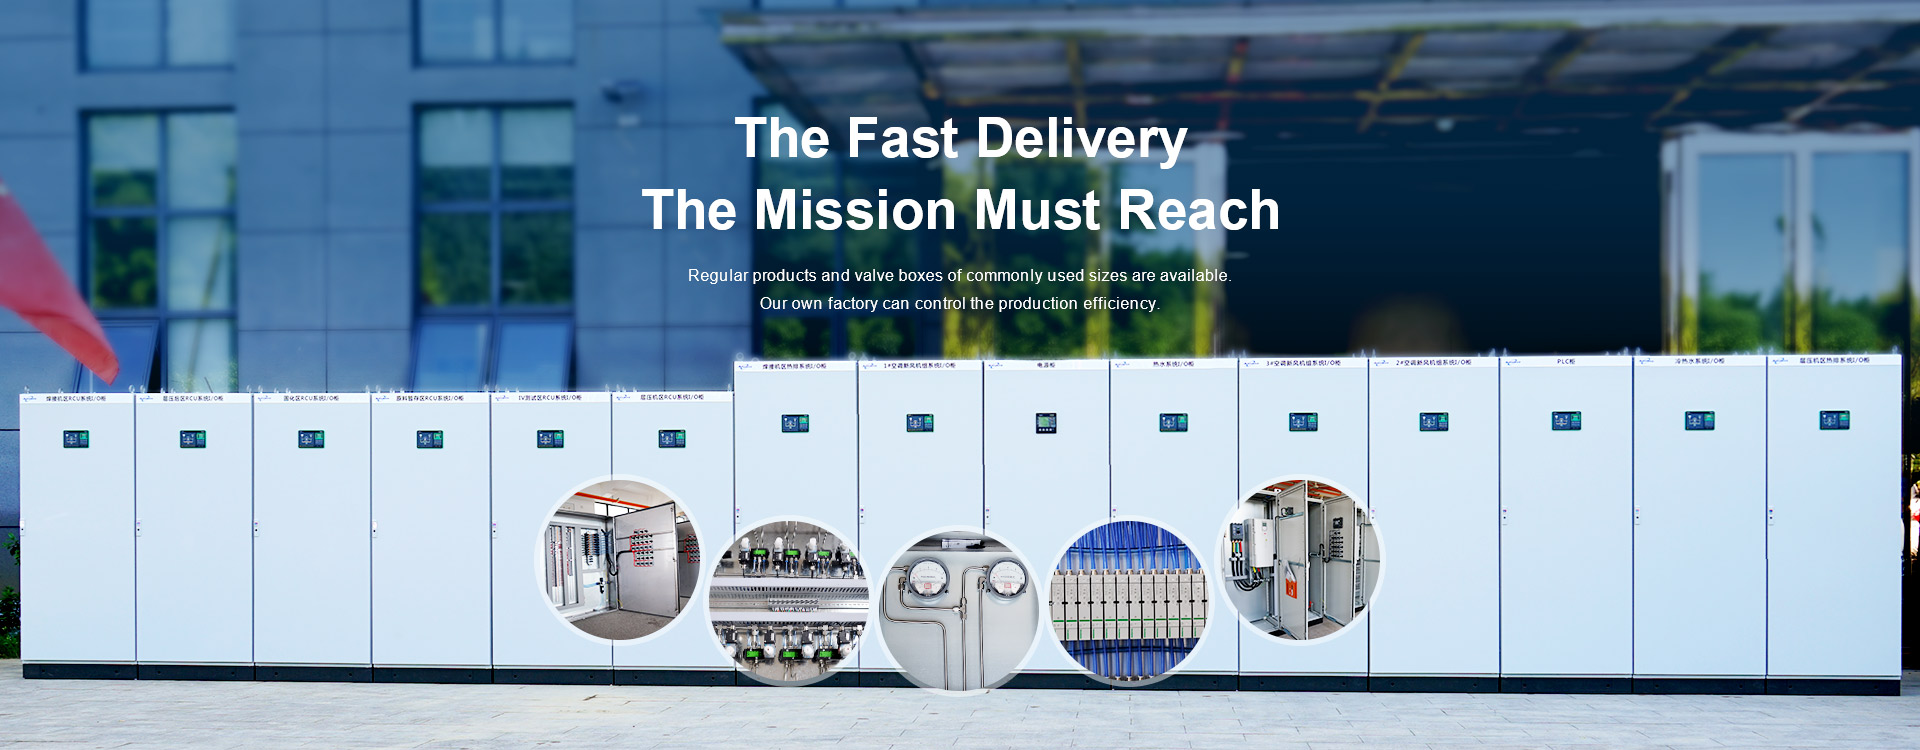 The Fast Delivery The Mission Must Reach